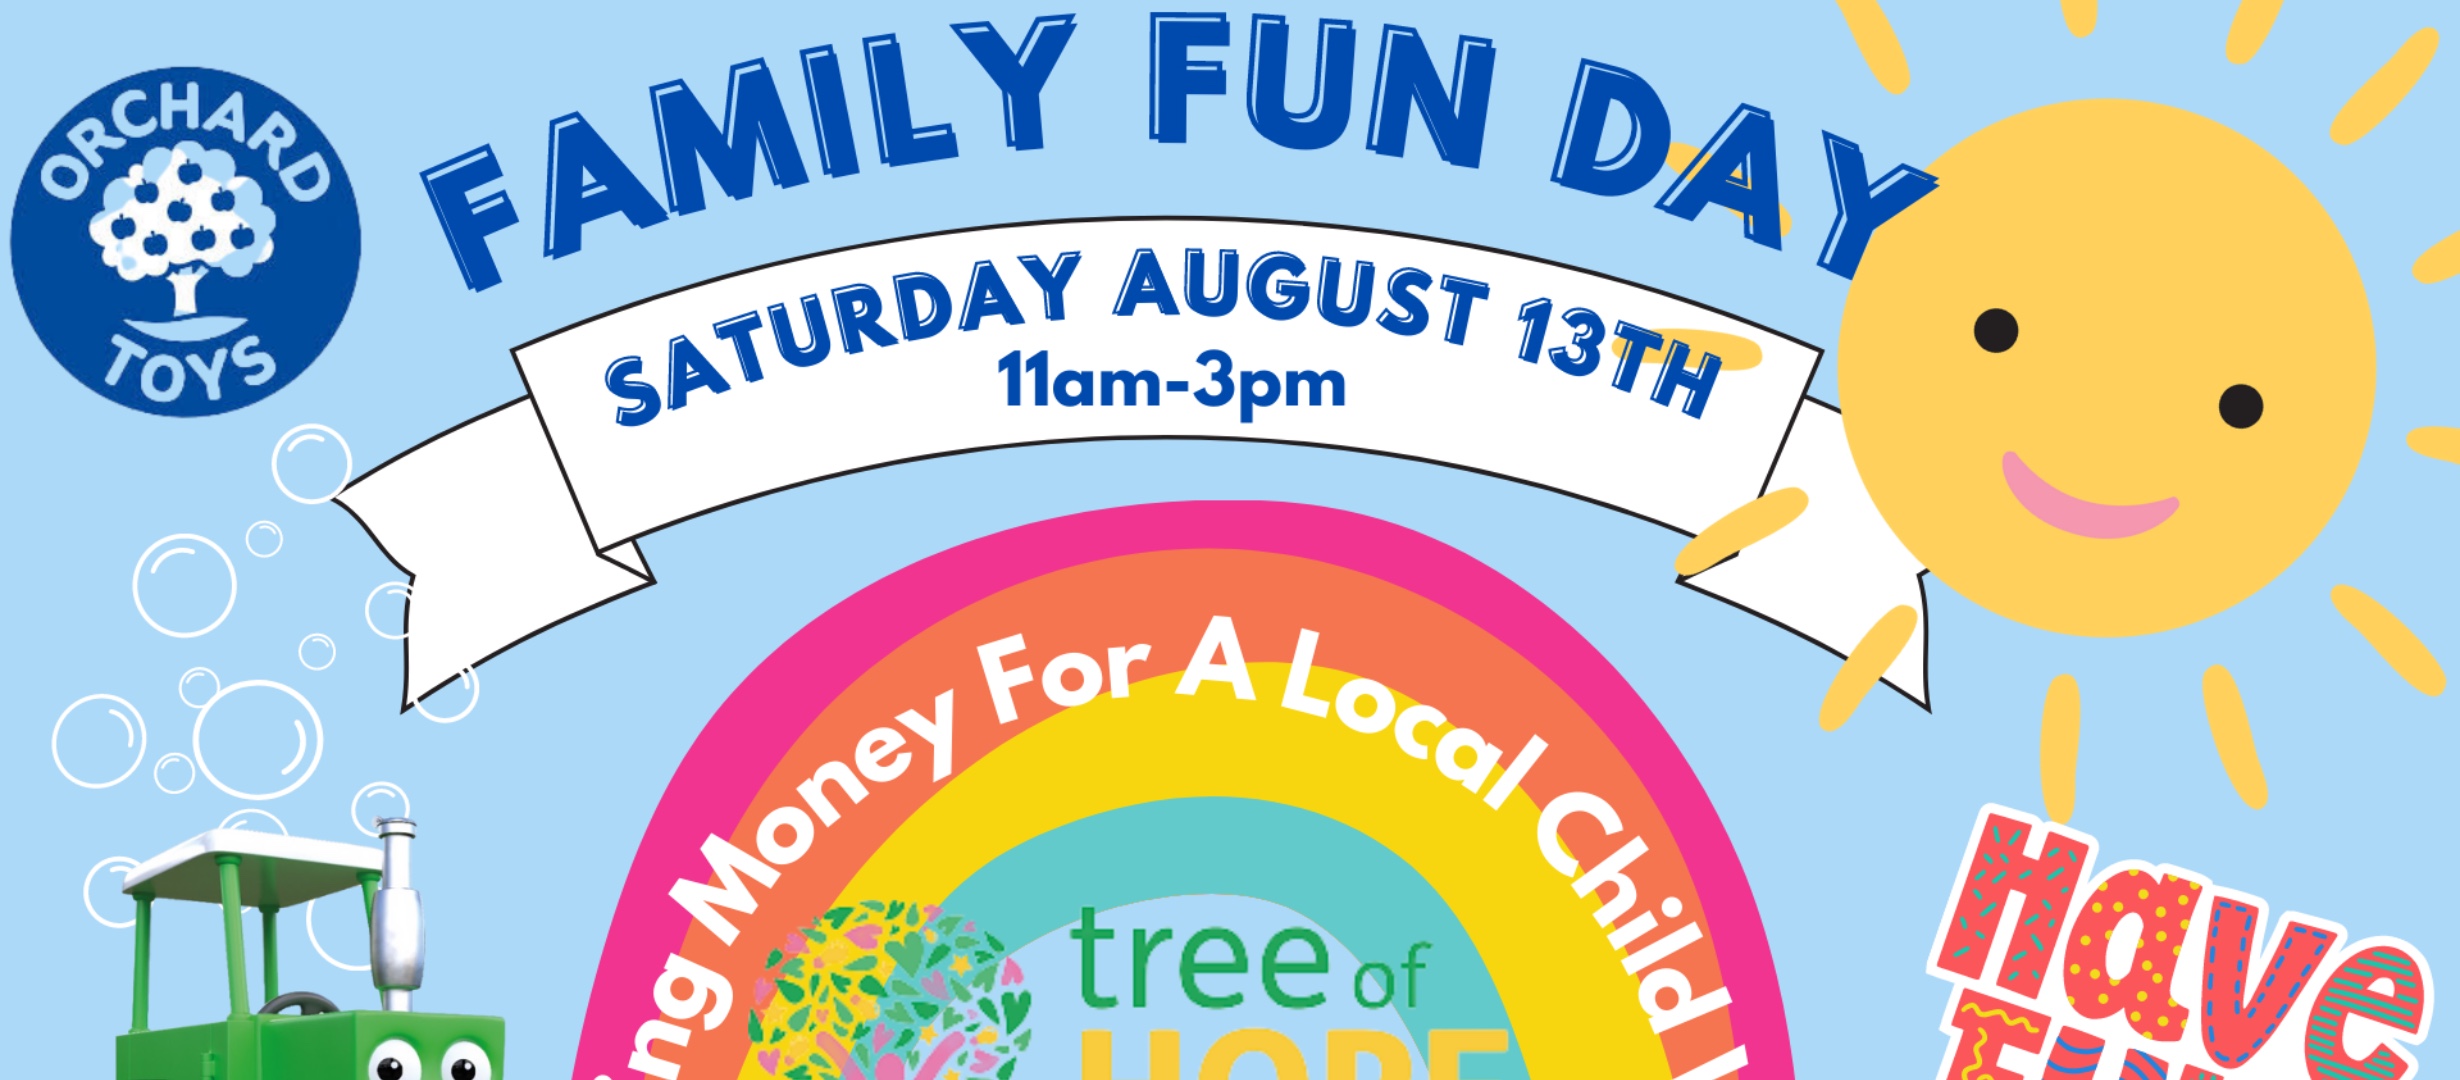 Graphic of a warm smiling sun shining over a rainbow, red the tractor and bubbles. Words state ‘family fun day’ Saturday august 13th 11am-3pm. Colourful fun writing says ‘have fun’. Orchard toys blue logo of a tree. The tree of hope charity logo of a pink person with arms stretched high like they’re a tree with leaves of green, pink and yellow in heart shapes. White words arch in the rainbow ‘raising Monday for a local child with tree of hope’. ‘Disability comfident’ 